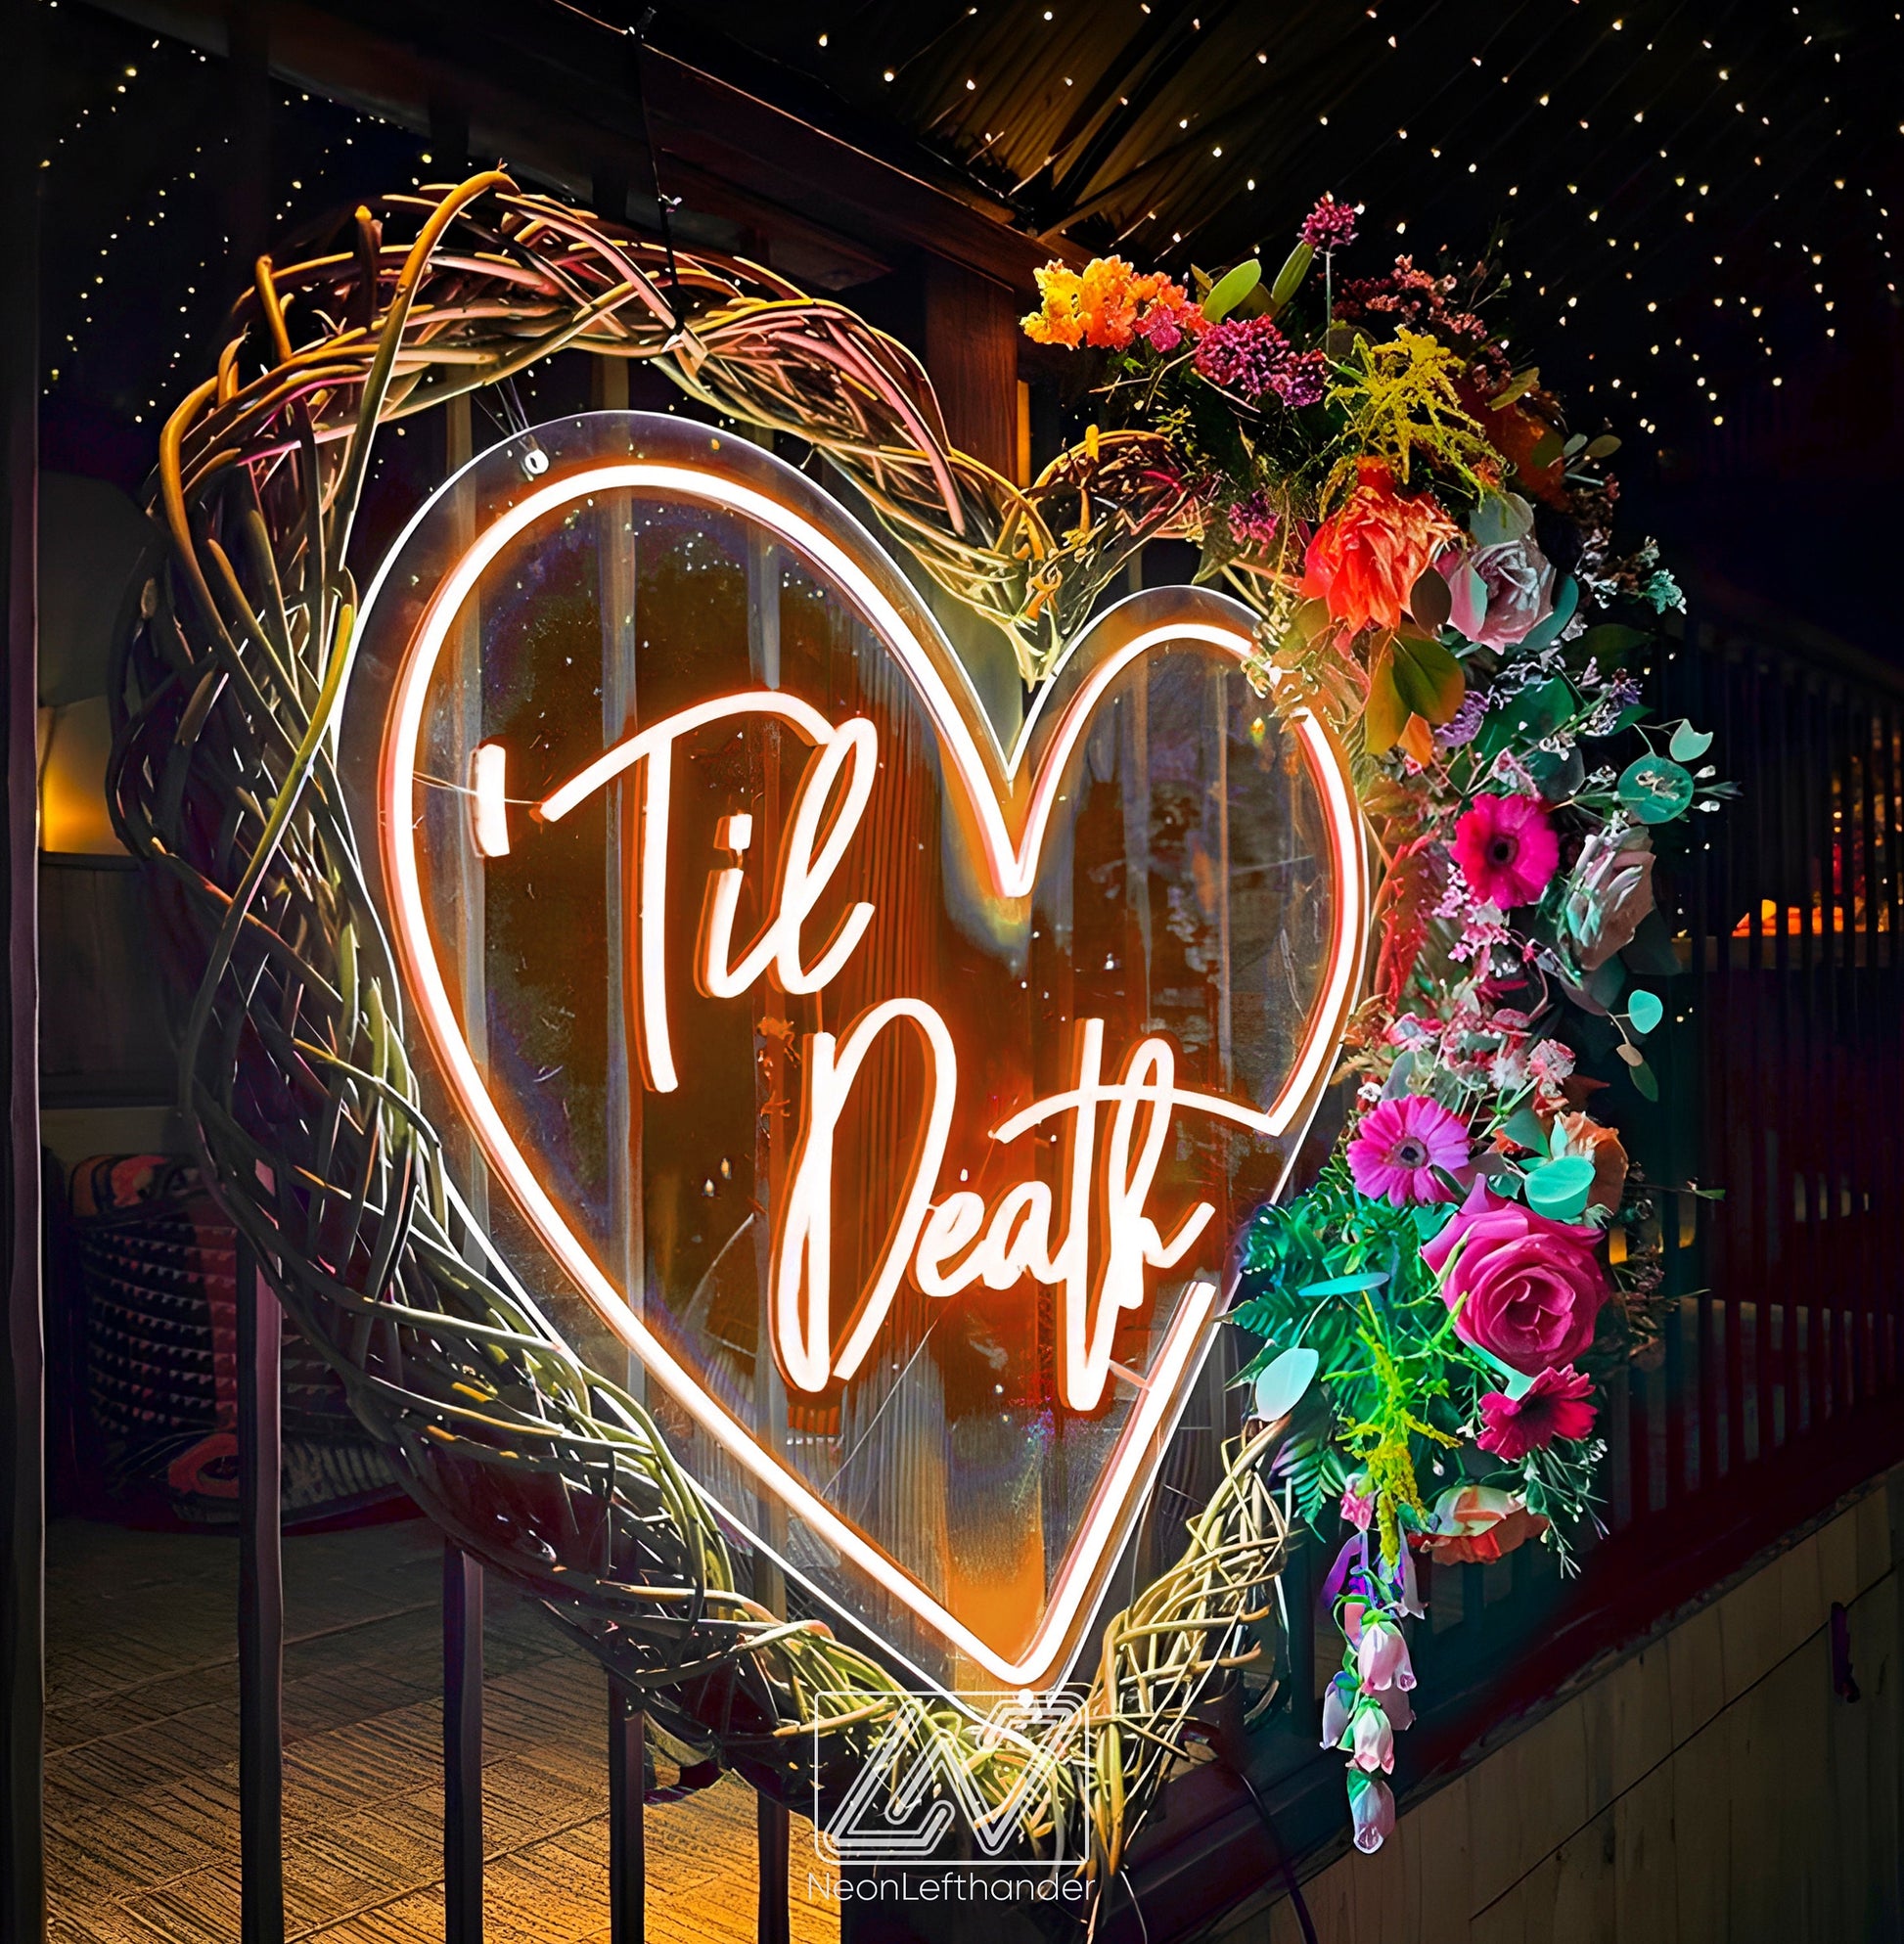 Til Death in Heart - LED Neon Sign, Wedding Neon Sign, Neon Sign for Wedding, Wedding Ceremony, Neon sign wall decor